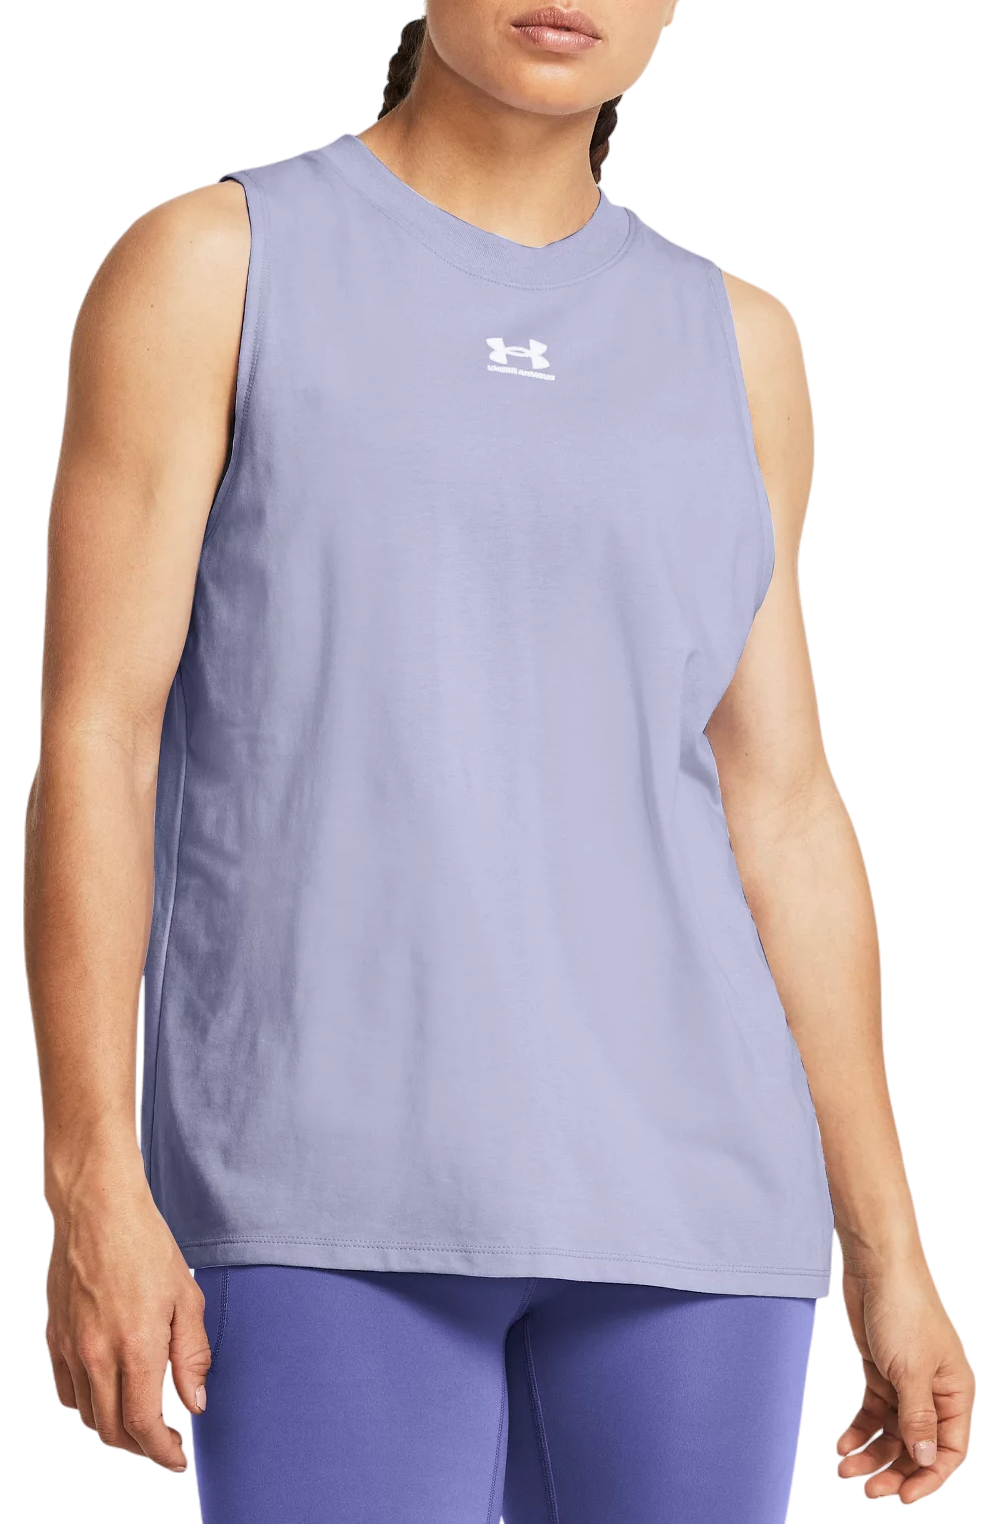 Linne Under Armour Campus Muscle Tank